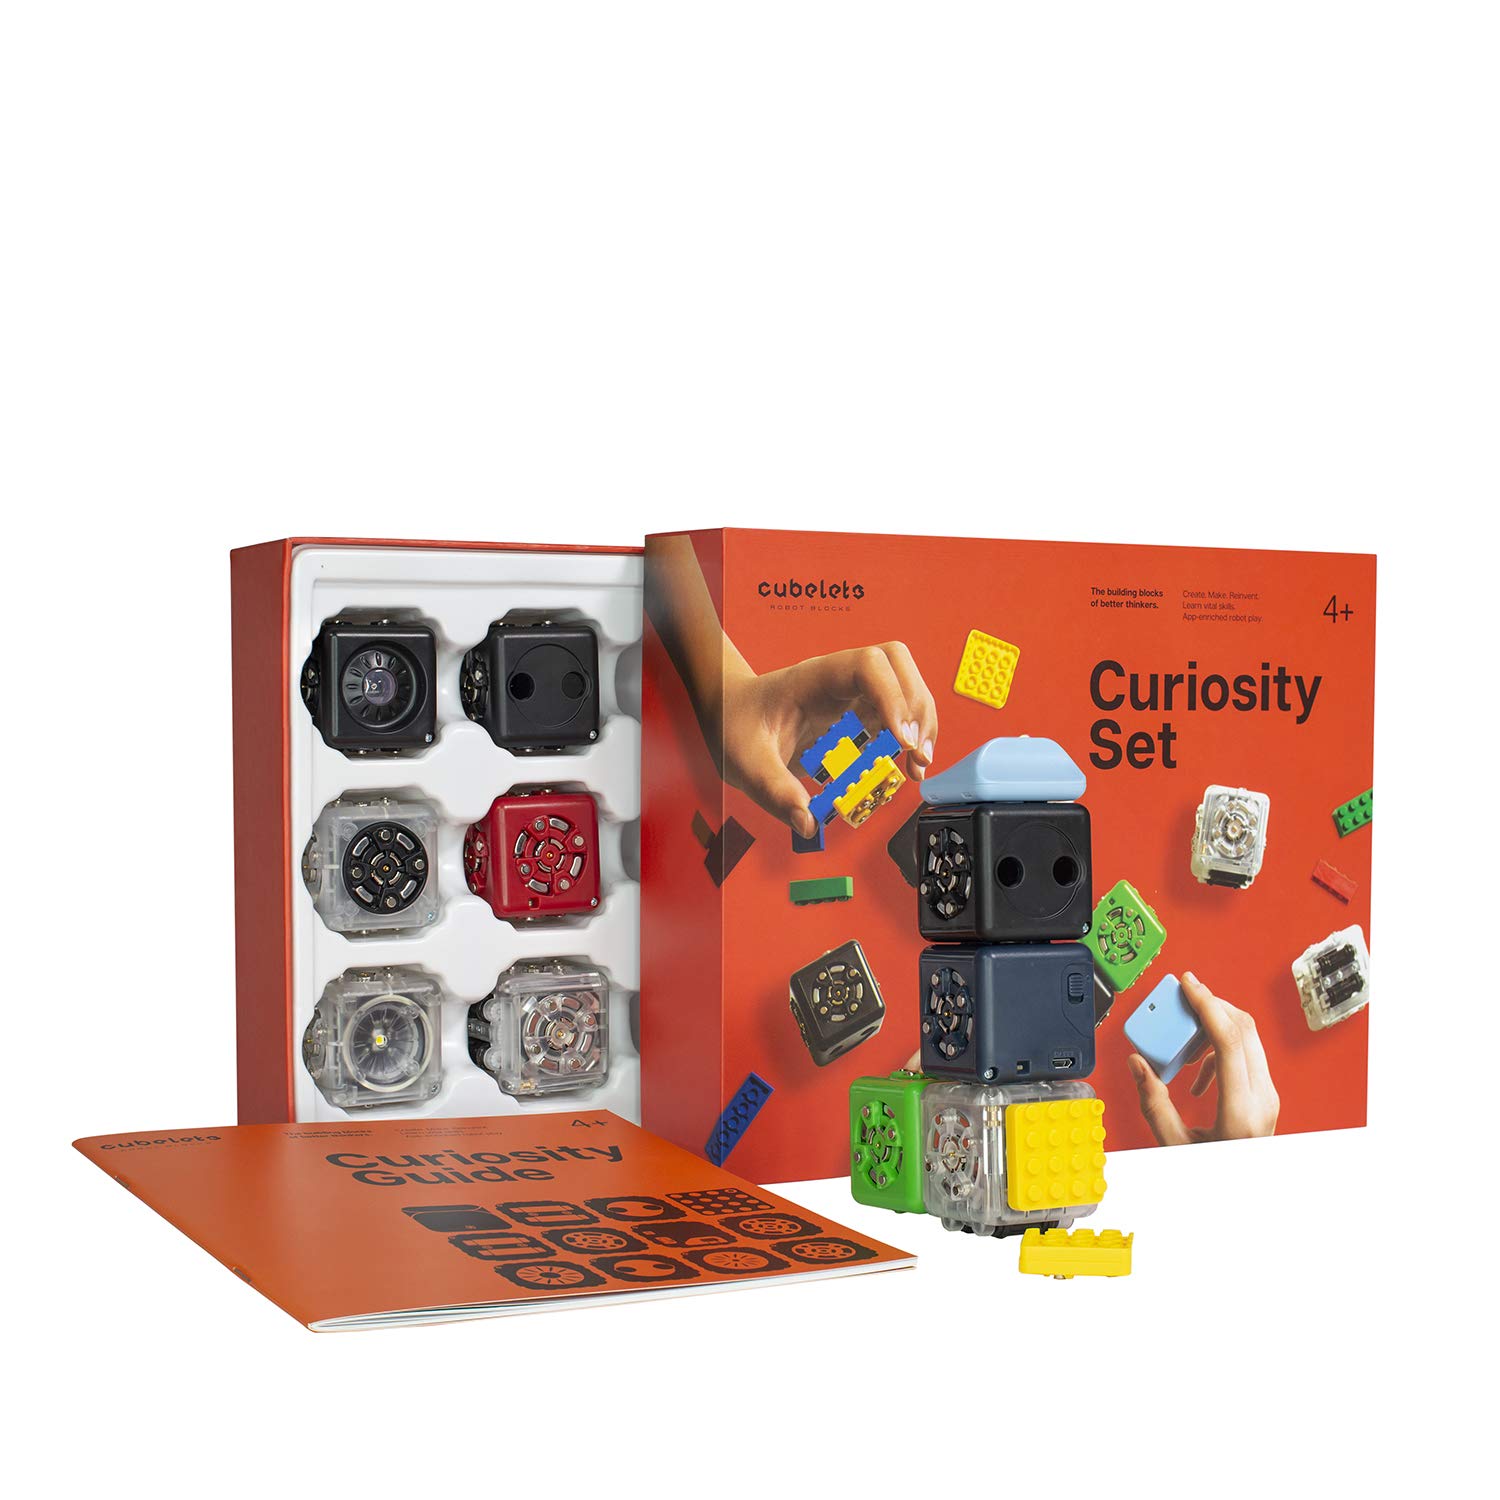 CUBELETS Robot Blocks - Curiosity Set for Home - Kids Coding Robots with Unlimited Possibilities, Extend Learning with STEM Concepts, Ages 4-100, Pre-K Thru College